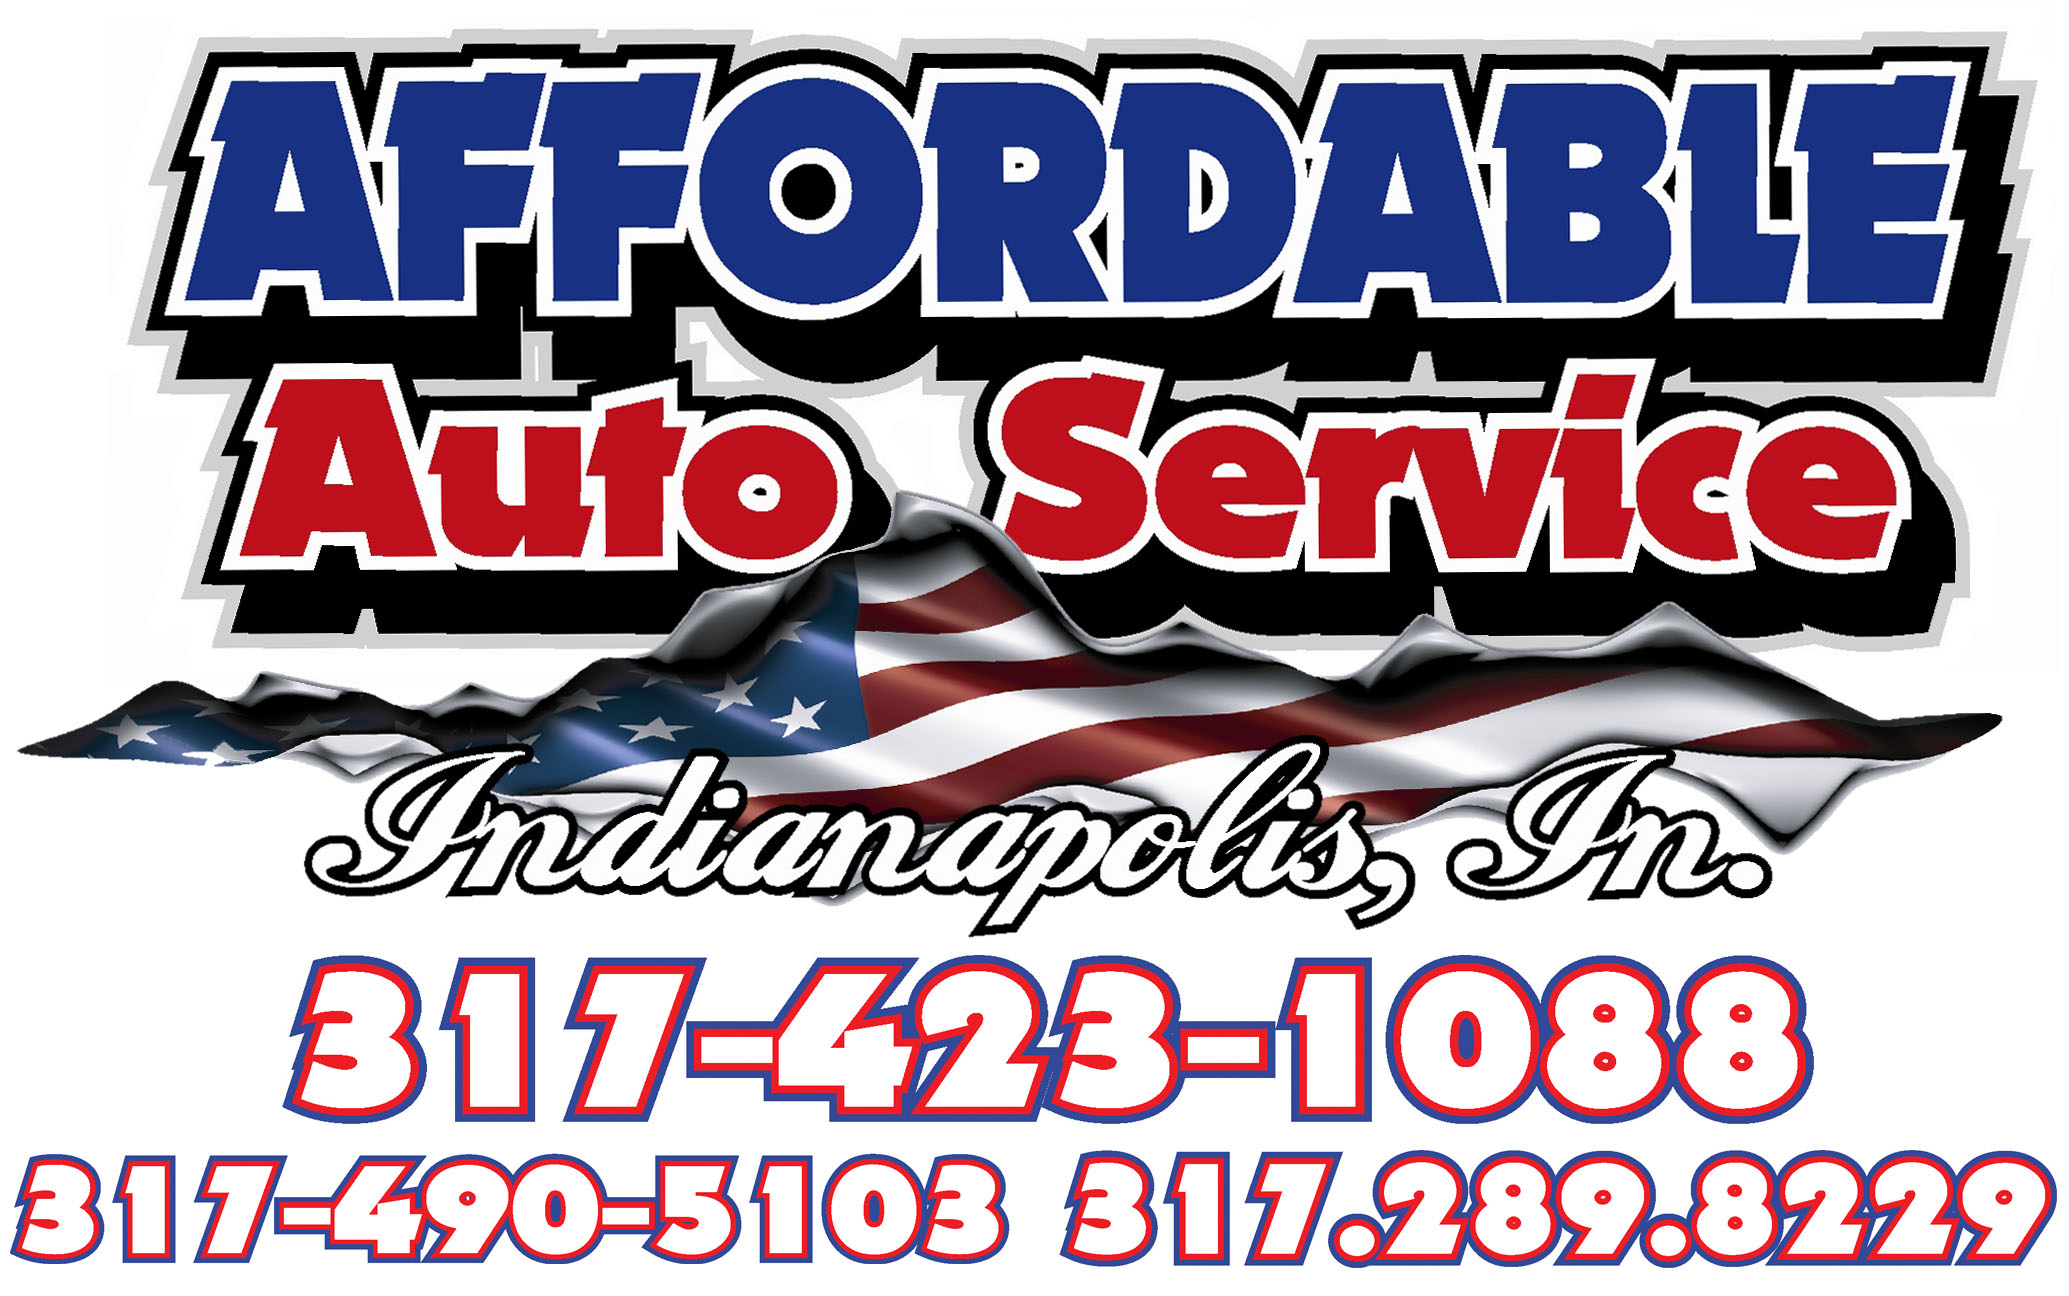 Affordable Auto Service & Towing